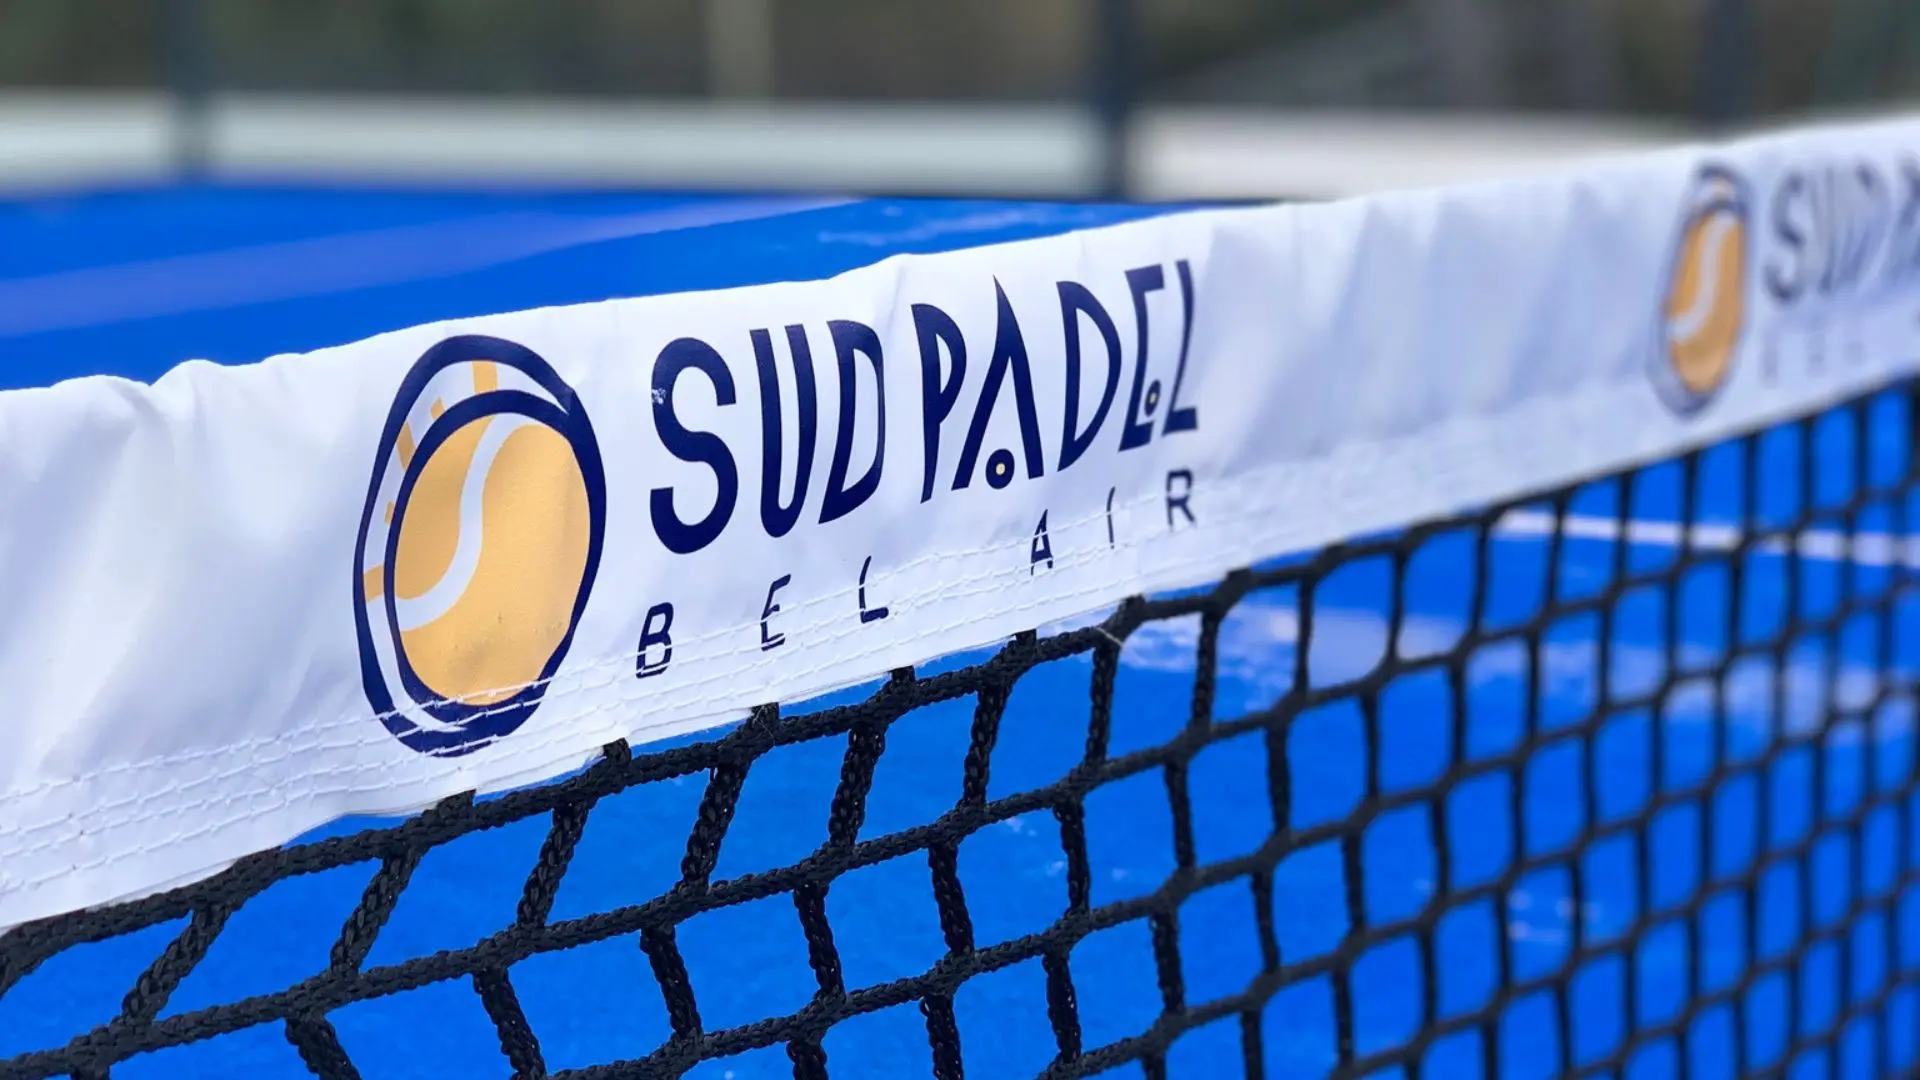 South Padel Bel Air goes from 4 to 6 runways